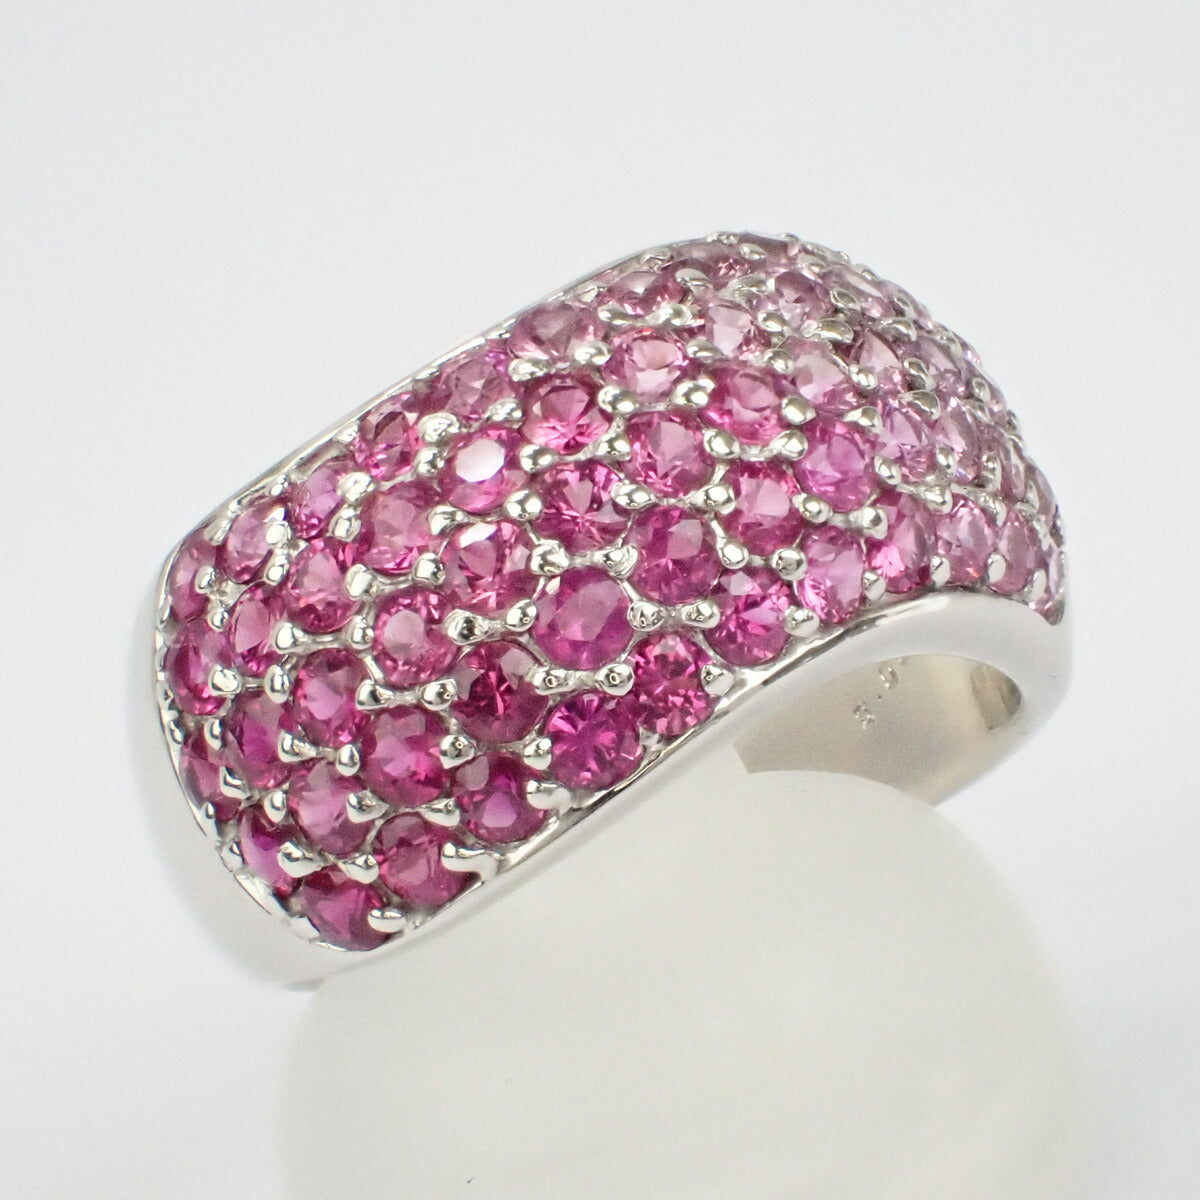 K18 White Gold Pink Sapphire 3.00ct Designer Ring, Ladies' Size 16 – Pre-owned